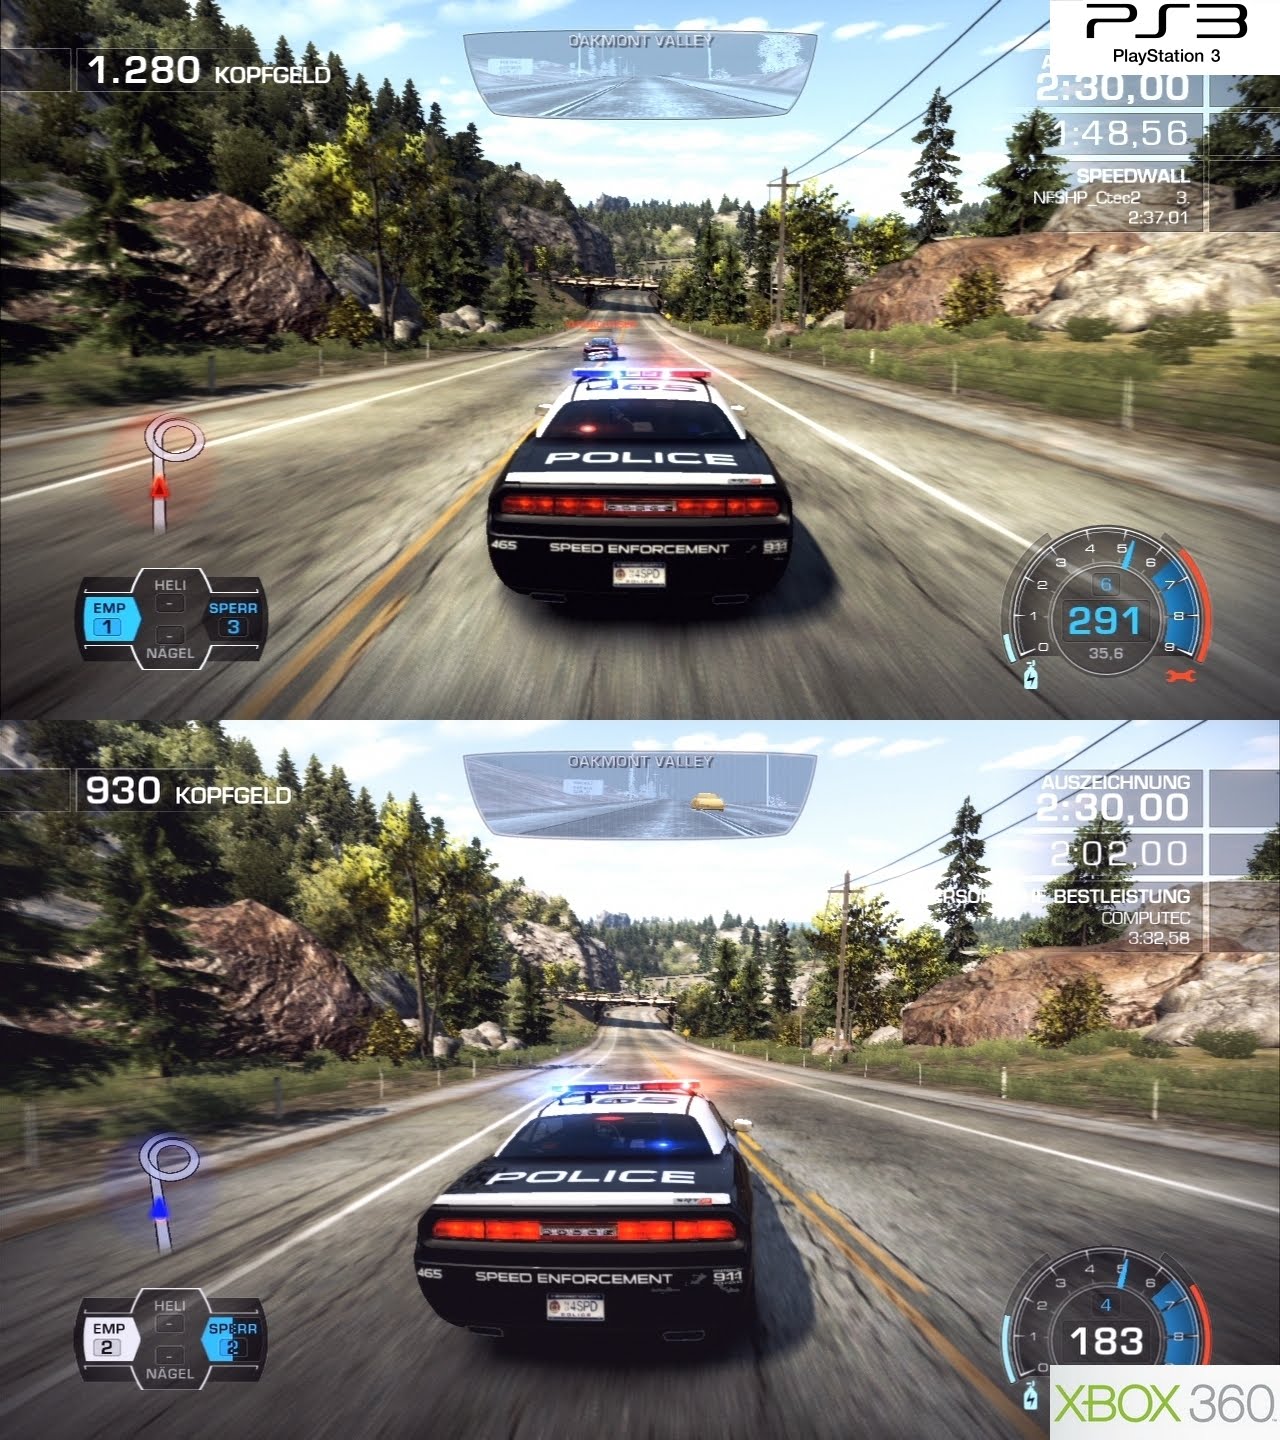 Listo celos Caramelo IQGamer: Tech Analysis: Need For Speed: Hot Pursuit (PS3 vs 360)